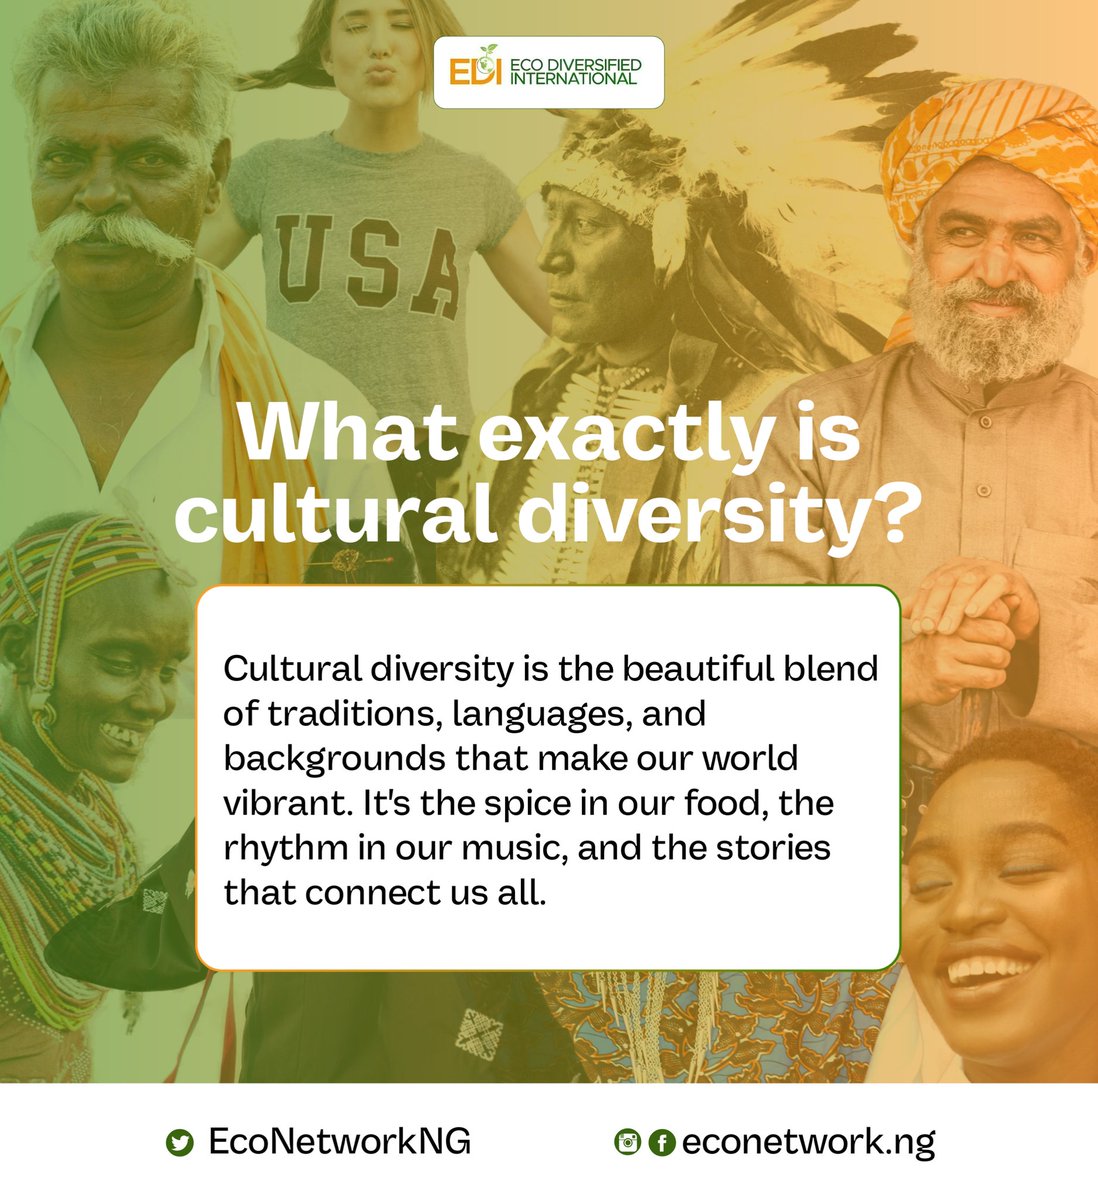 Cultural diversity is the colorful essence of life, blending samba with blues and spices from different cuisines, weaving a beautiful tapestry of humanity. Embracing differences and sharing stories unites us.

#culturaldiversity #diversitymatters
 #inclusion #celebratediversity